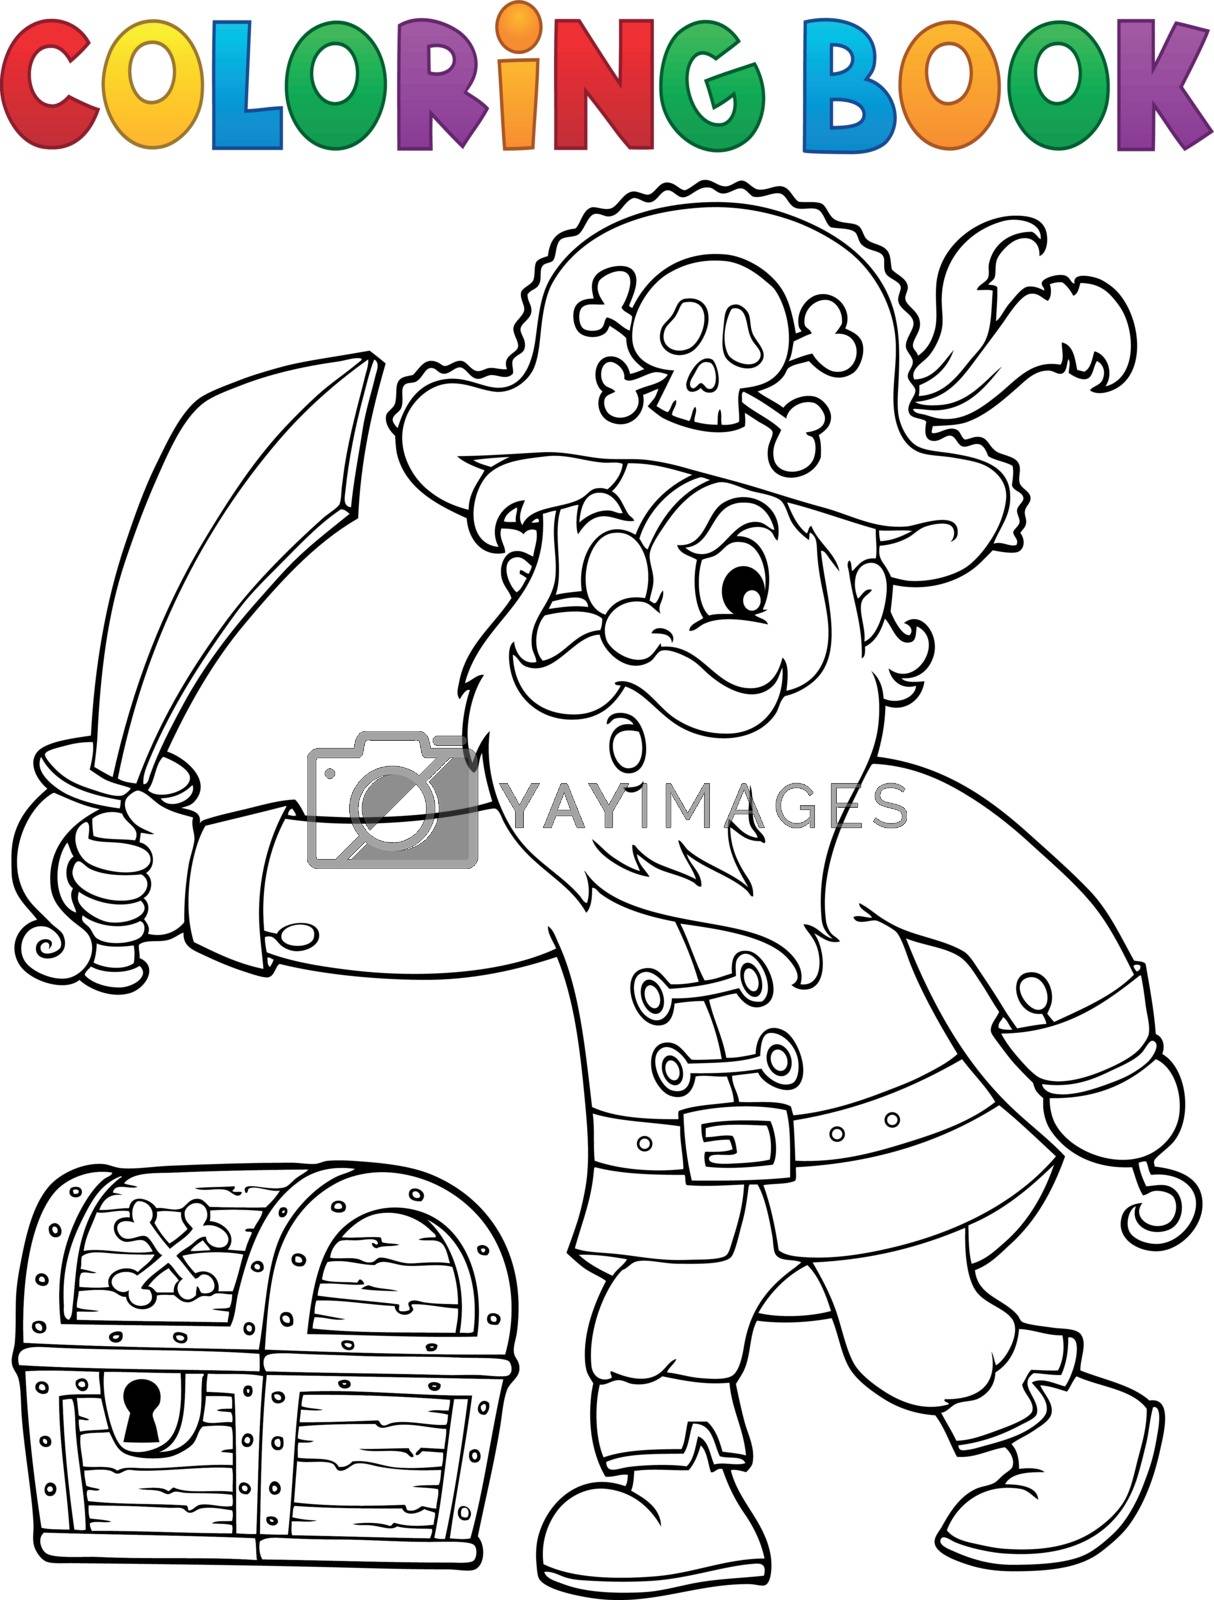 Royalty free image of Coloring book pirate holding sabre 1 by clairev